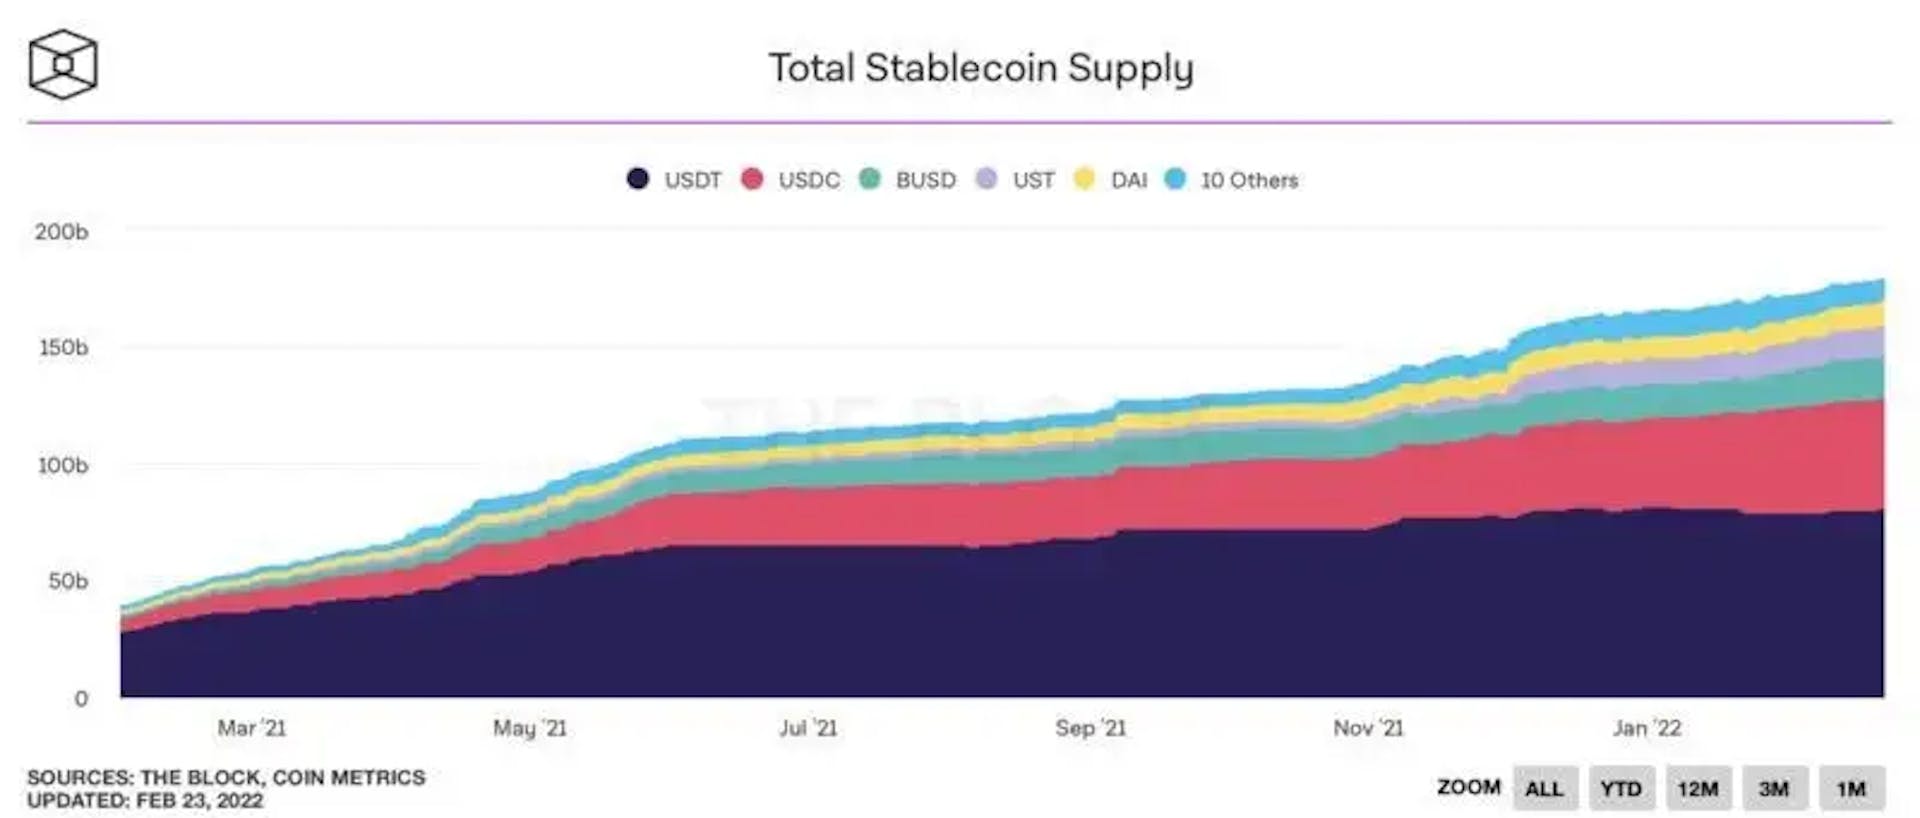 Growth of the Stablecoin Supply (Source: Bloomberg)